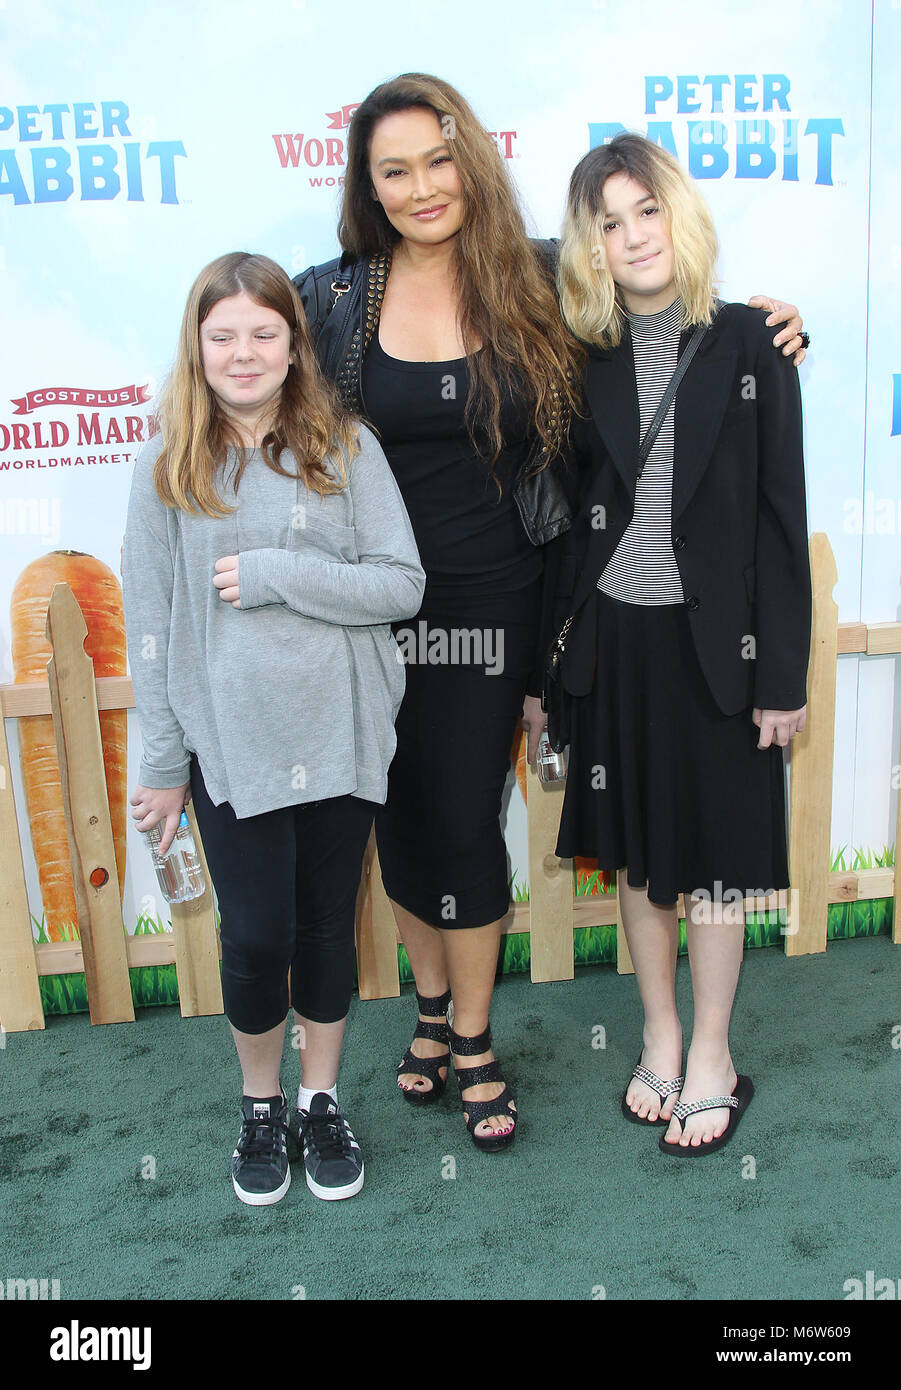 'Peter Rabbit' premieres at The Grove  Featuring: Tia Carrere, daughter Bianca Wakelin (right) Where: Los Angeles, California, United States When: 03 Feb 2018 Credit: Adriana M. Barraza/WENN.com Stock Photo